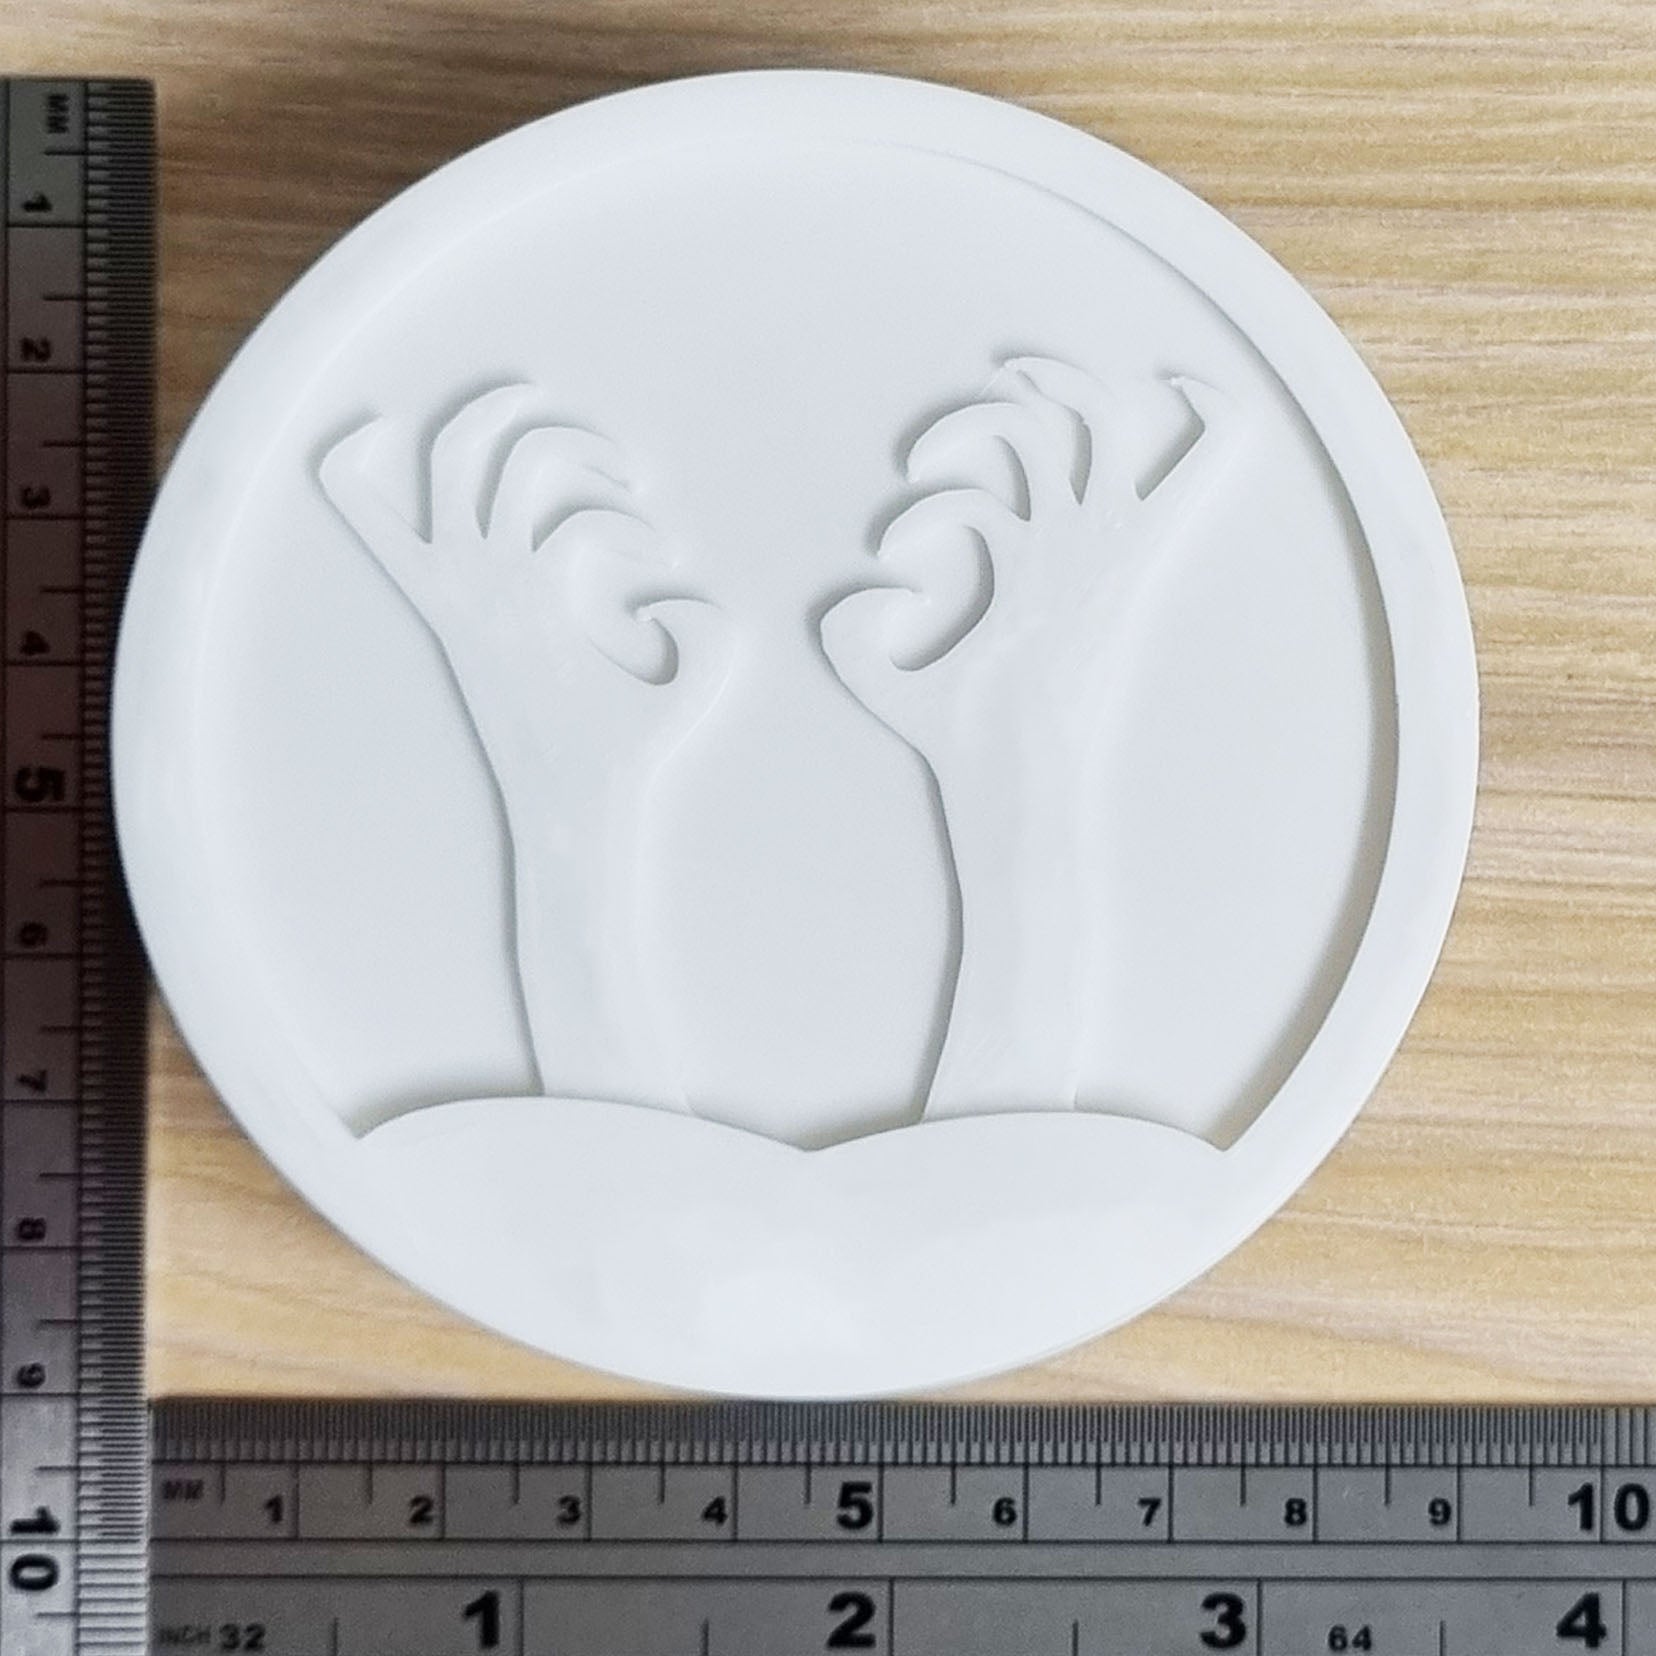 Haunting Hands Mould | Truly Personal | Bath Bomb, Soap, Resin, Chocolate, Jelly, Wax Melts Mold